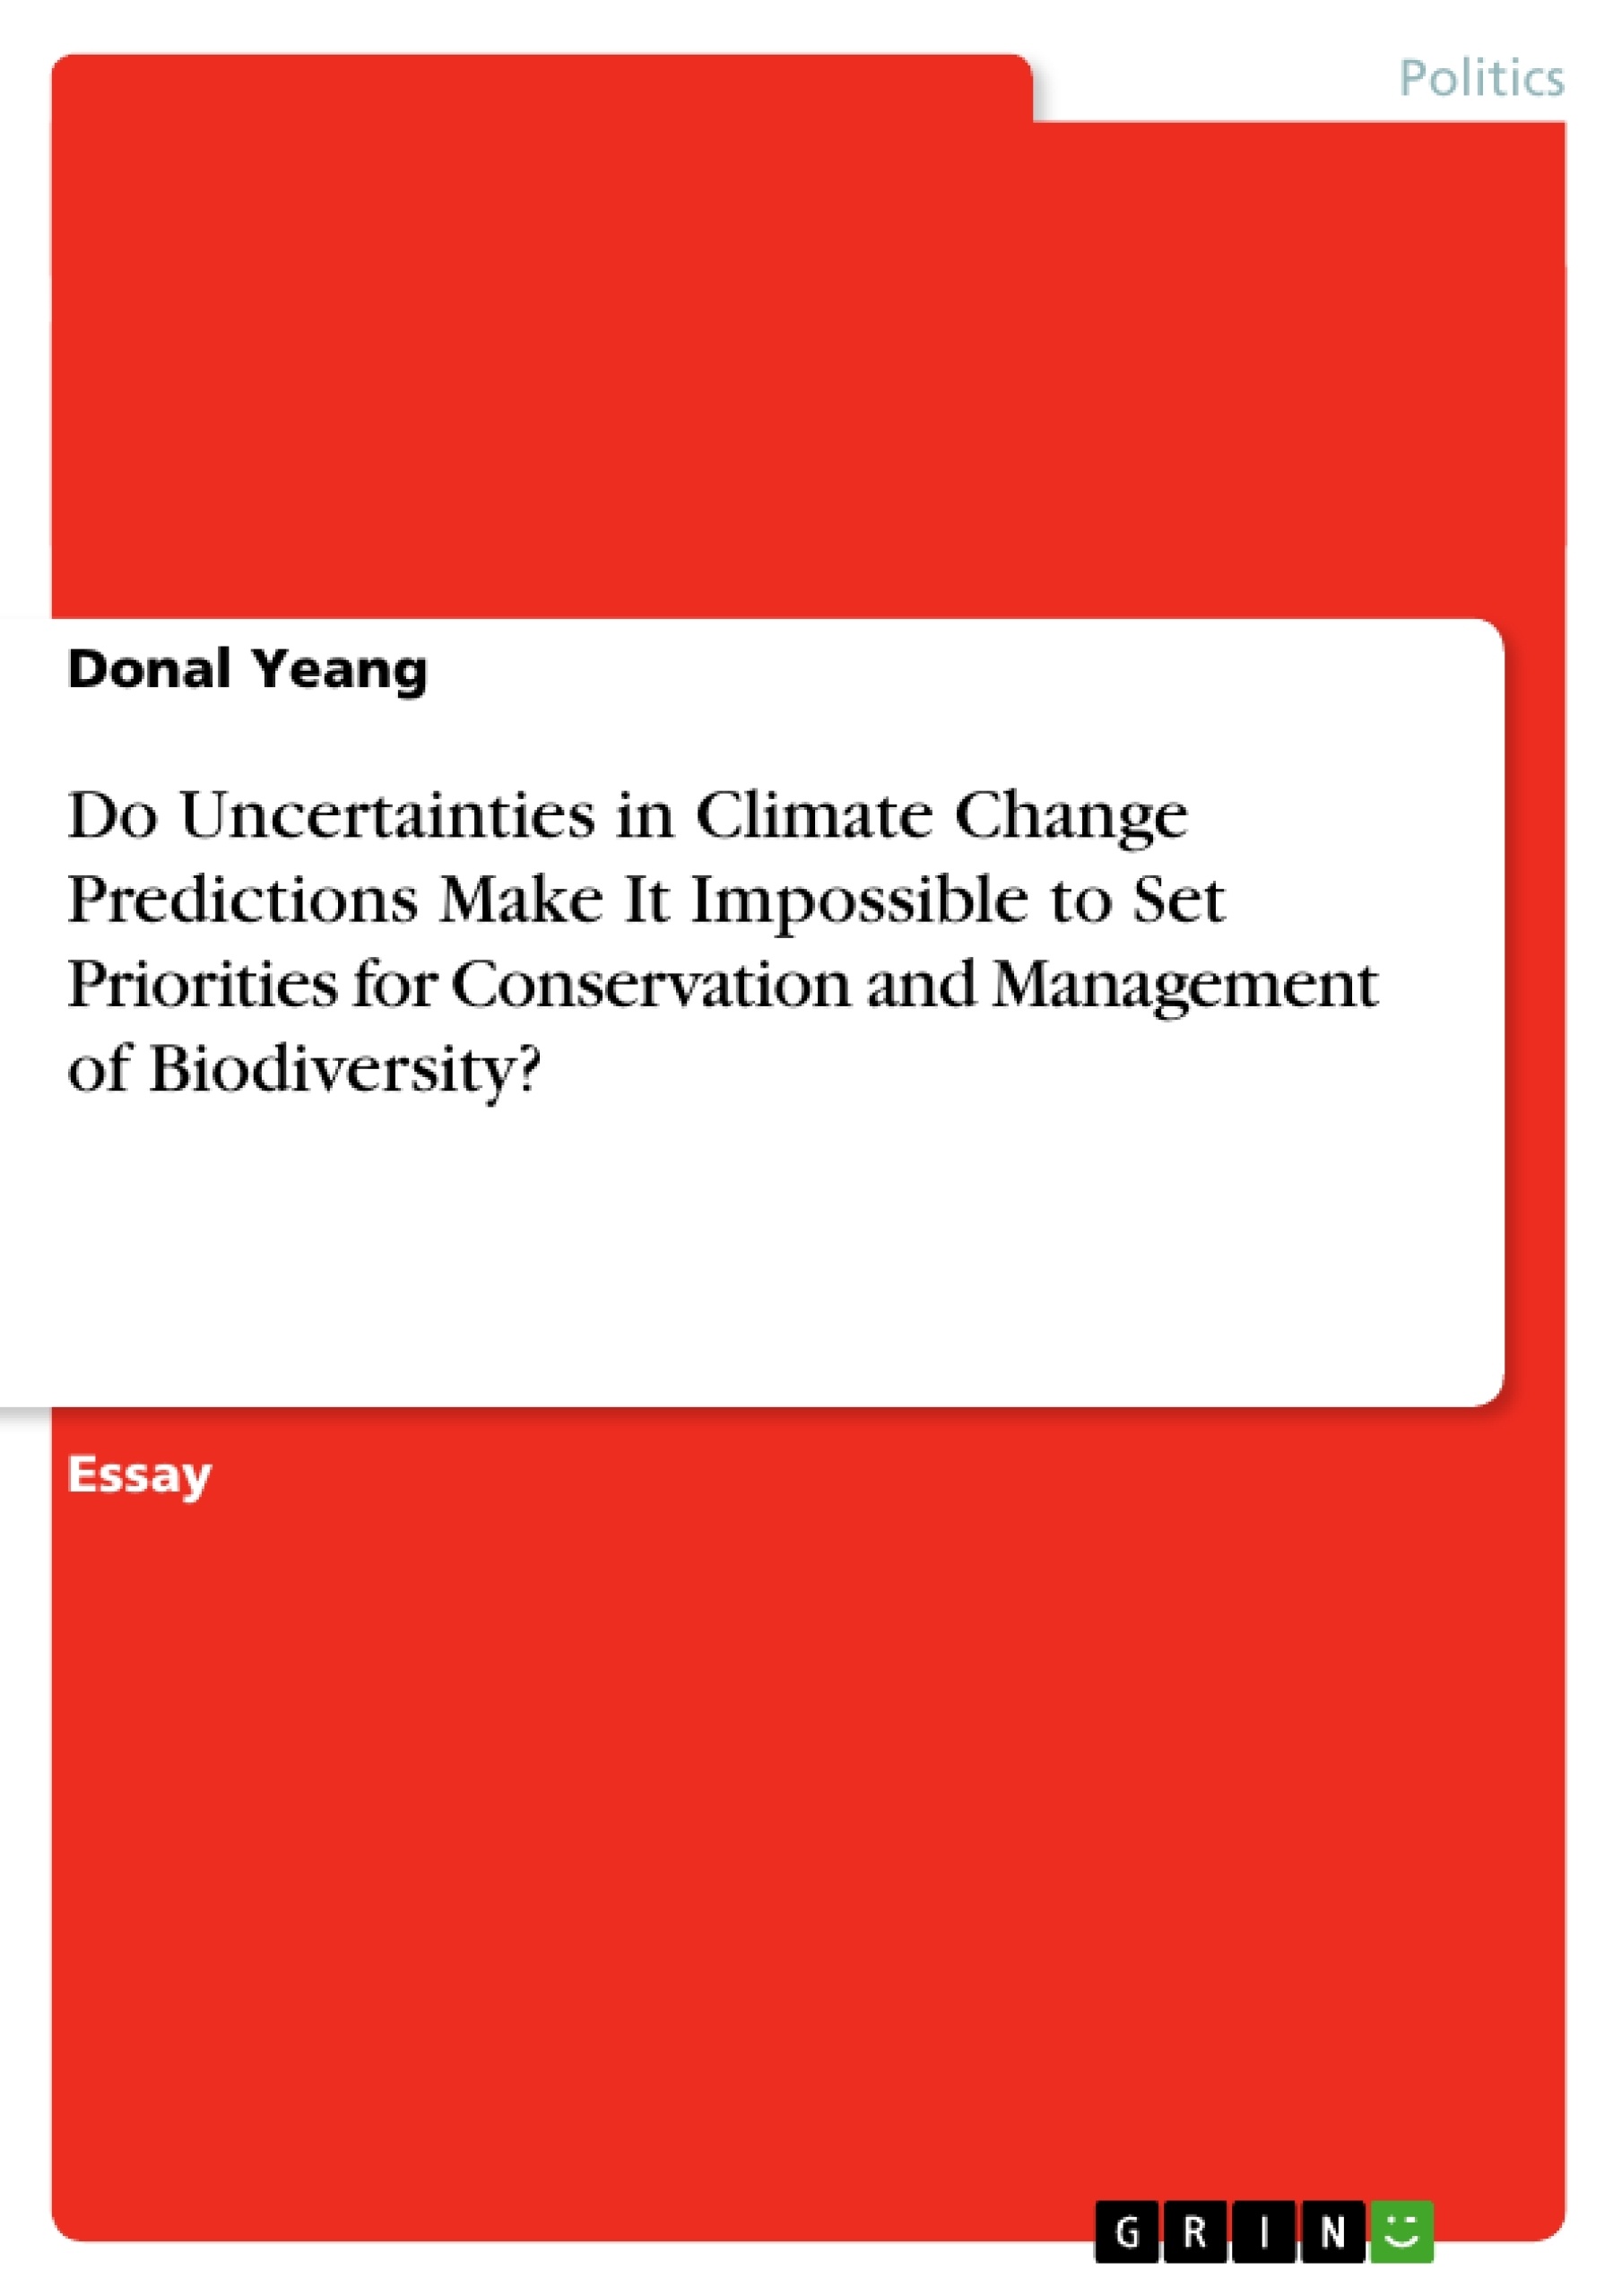 Title: Do Uncertainties in Climate Change Predictions Make It Impossible to Set Priorities for Conservation and Management of Biodiversity?